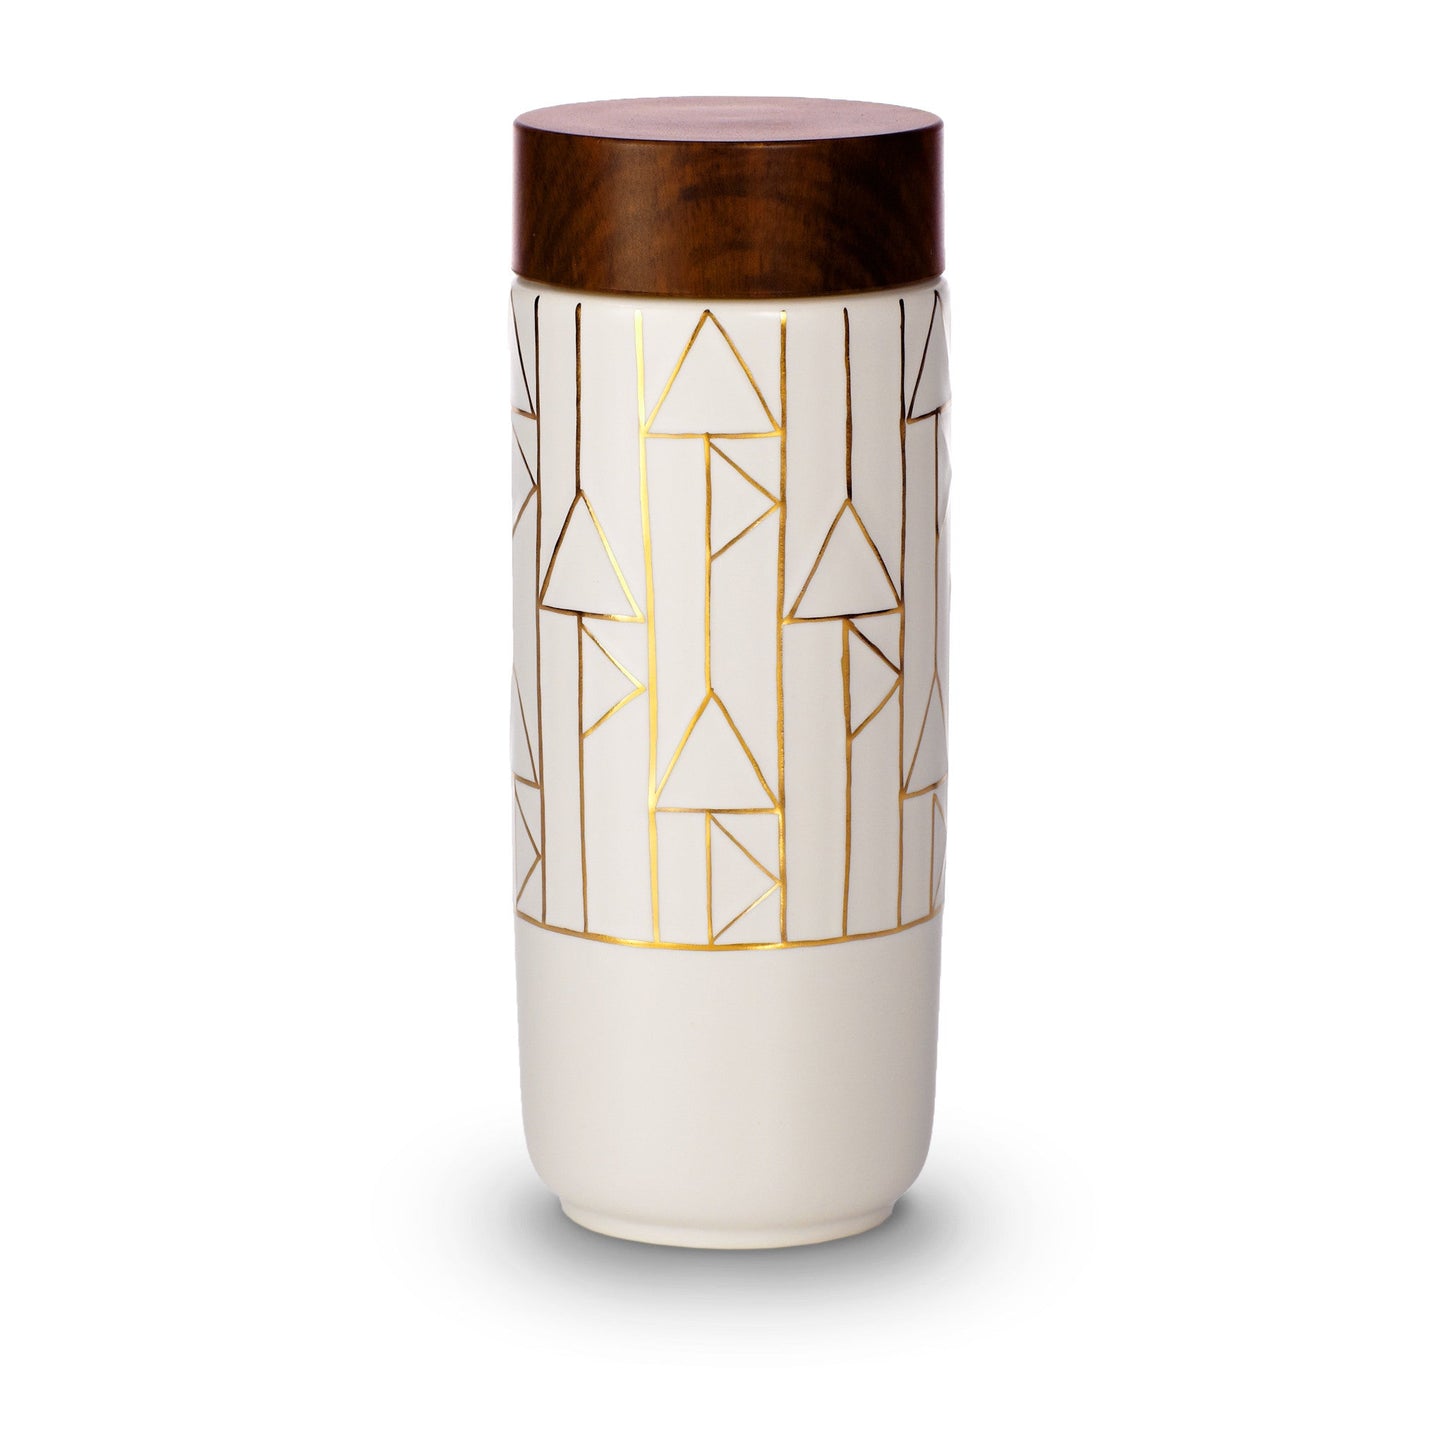 The Alchemical Signs Gold Ceramic Travel Mug by ACERA LIVEN